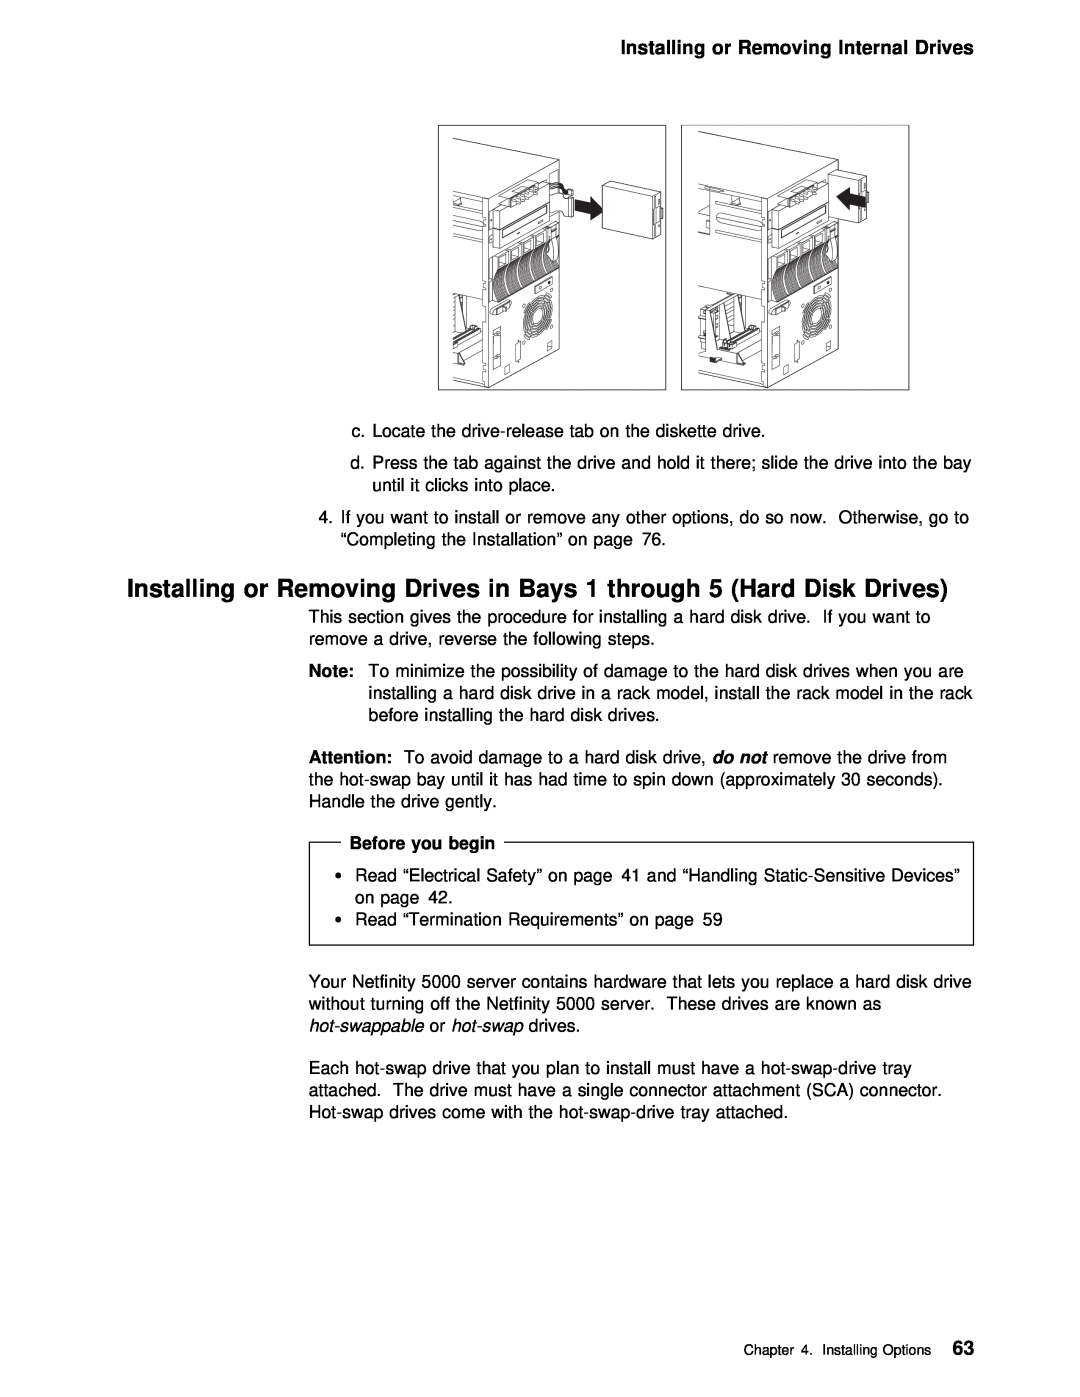 IBM 5000 manual Installing or Removing Drives in Bays 1 through 5 Hard Disk Drives, Installing or Removing Internal Drives 